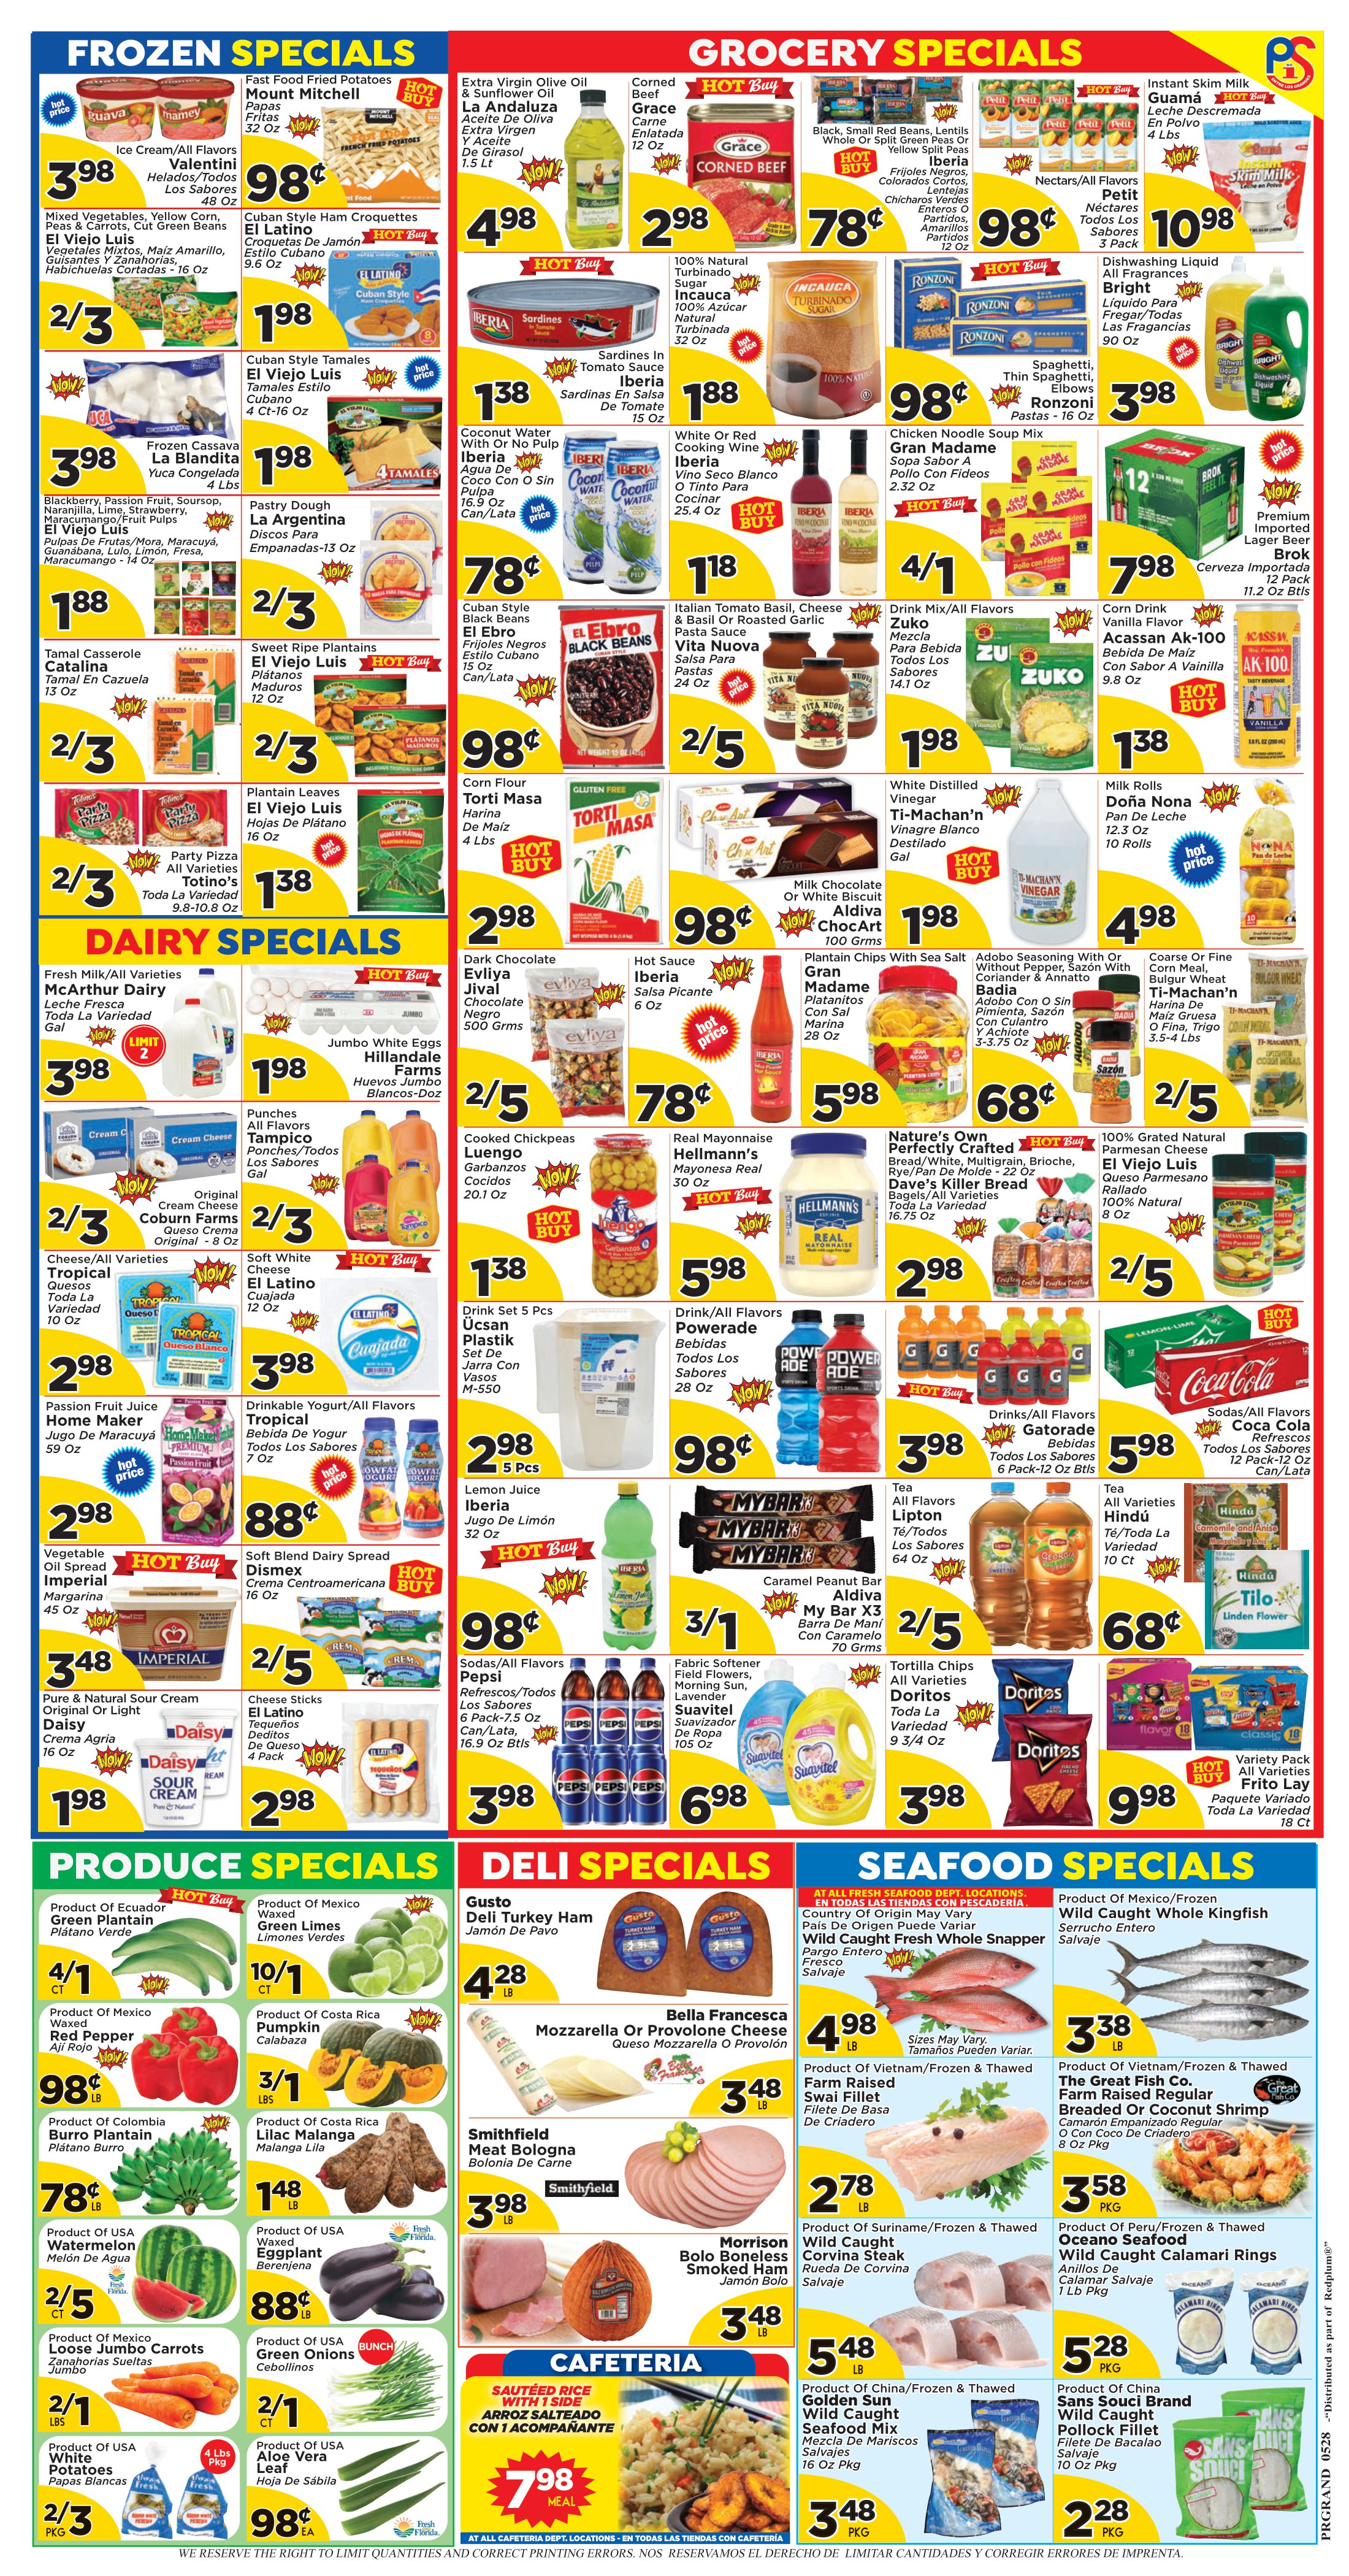 Presidente Supermarket - Weekly Promo for Stores 7, 38, 45 and 51 Page 2